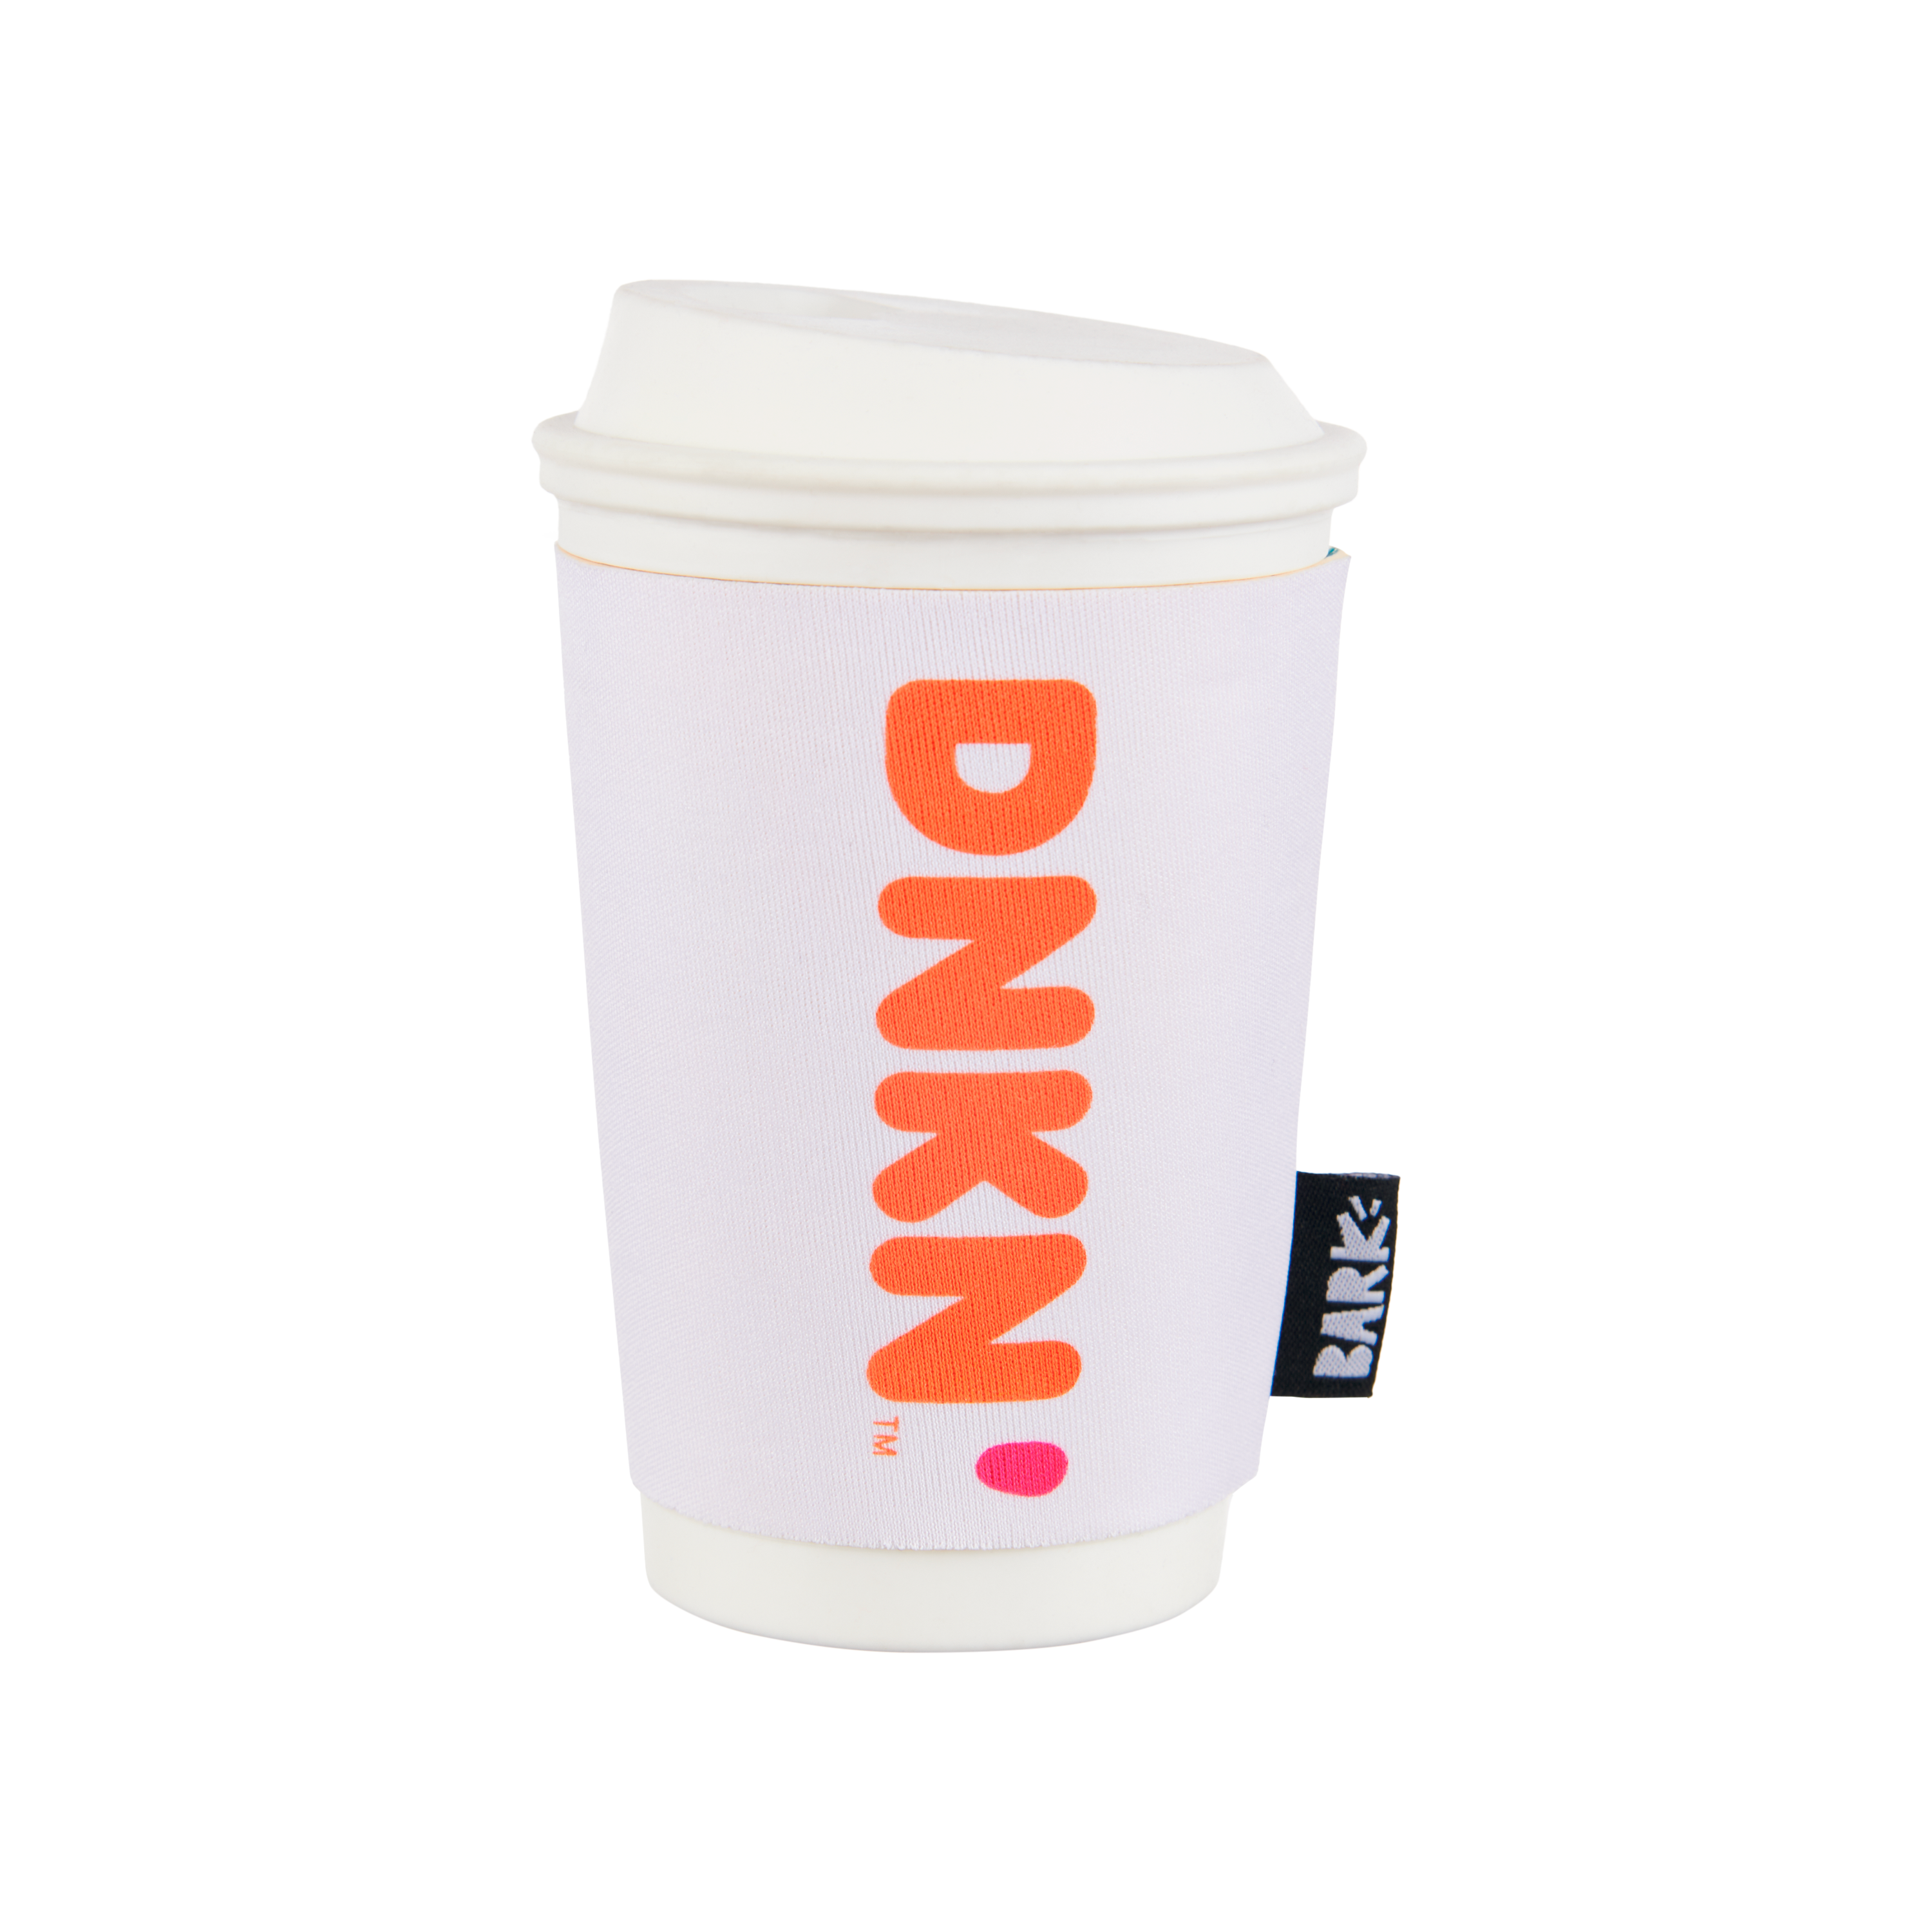 Dunkin'® Donuts Coffee Cup Toy